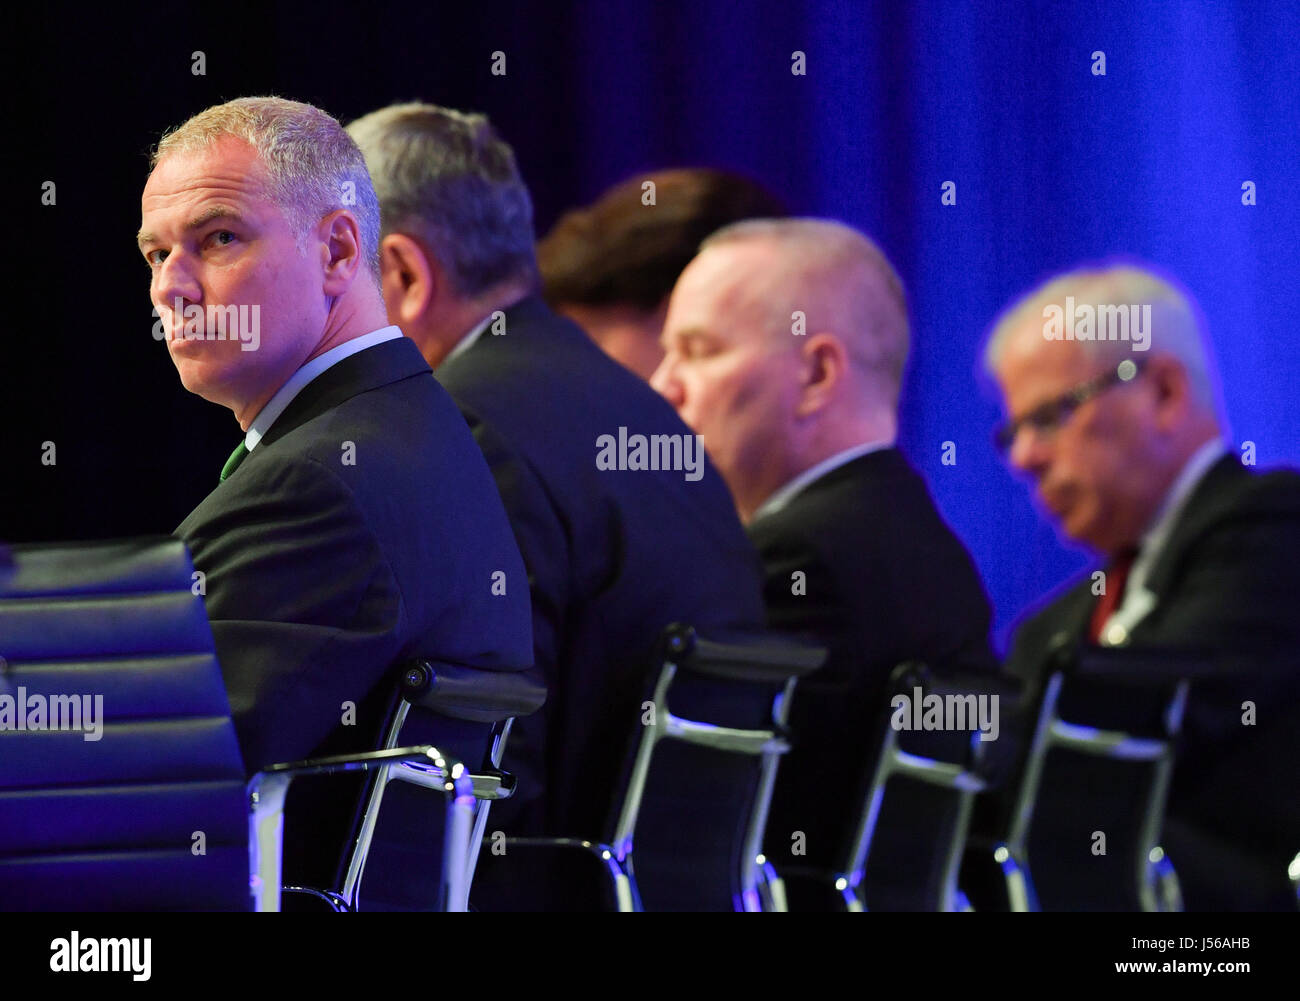 Frankfurt, Germany. 17th May, 2017. Carsten Kengeter (L), the CEO of Deutsche Boerse AG, with fellow board of directors members Jeffrey Tessler (R-L), Hauke Stars, Andreas Preuss and Gregor Pottmeyer at the company's annual general meeting in Frankfurt am Main, Germany, 17 May 2017. Credit: dpa picture alliance/Alamy Live News Stock Photo